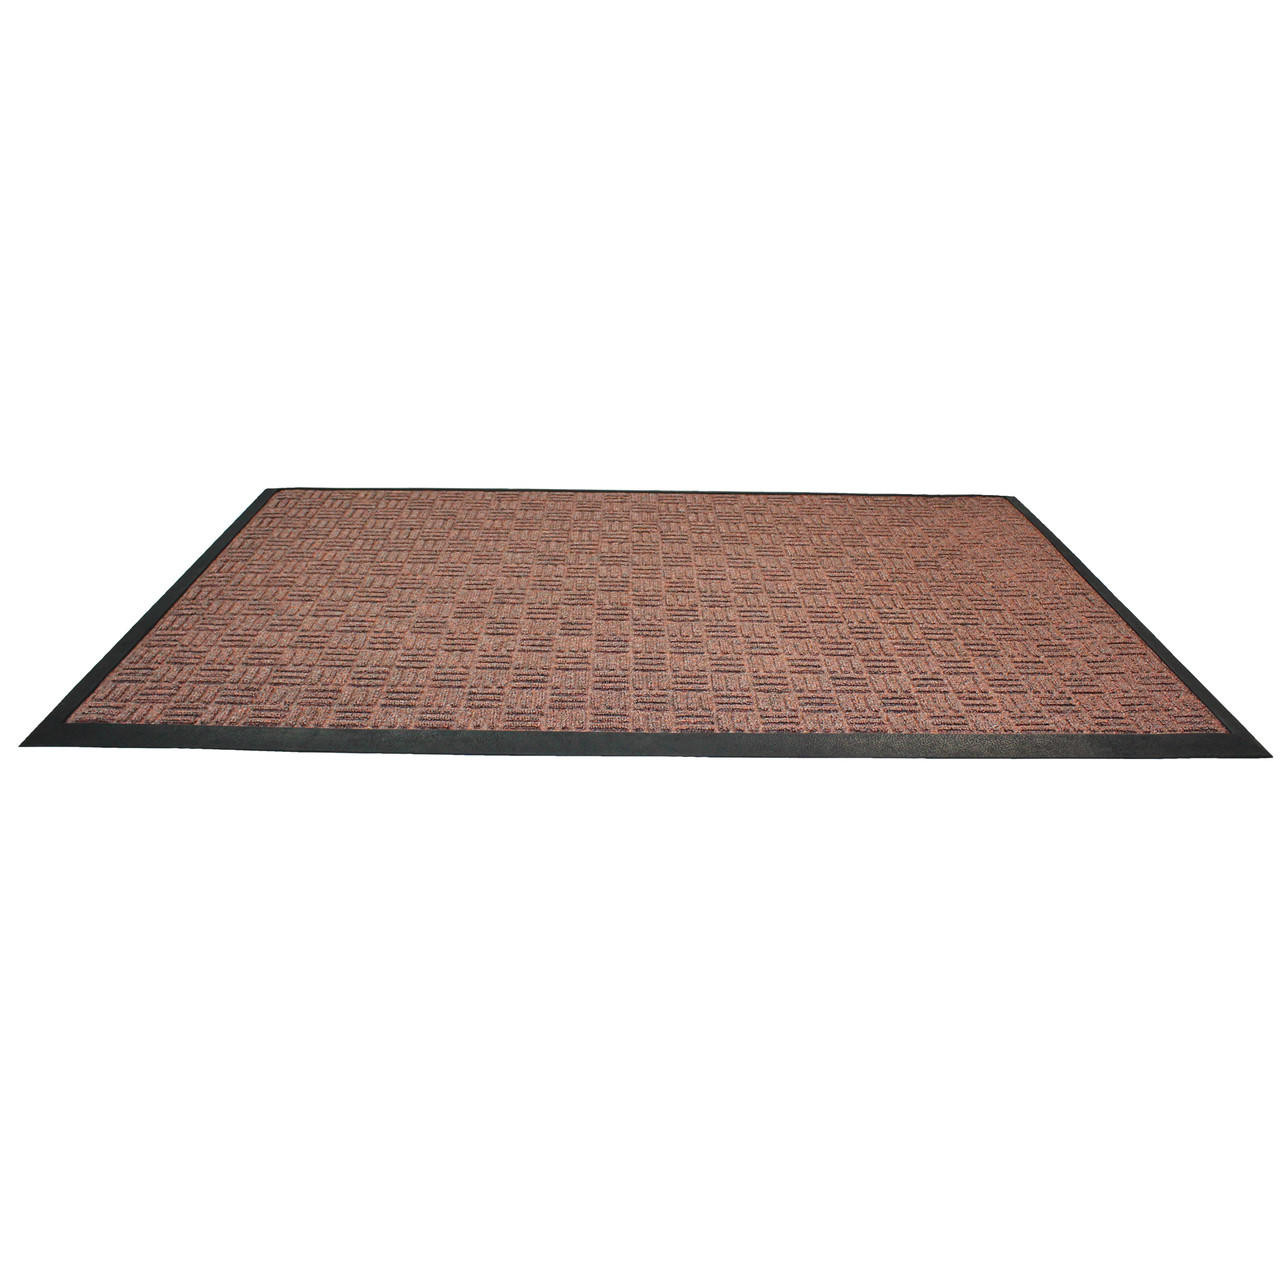 https://cdn11.bigcommerce.com/s-fjwps1jbkv/images/stencil/1280x1280/products/346/3867/ultralux-premium-indoor-outdoor-entrance-mat-or-absorbent-strong-anti-slip-entry-rug-heavy-duty-doormat-or-brown__17702.1689078708.jpg?c=2?imbypass=on